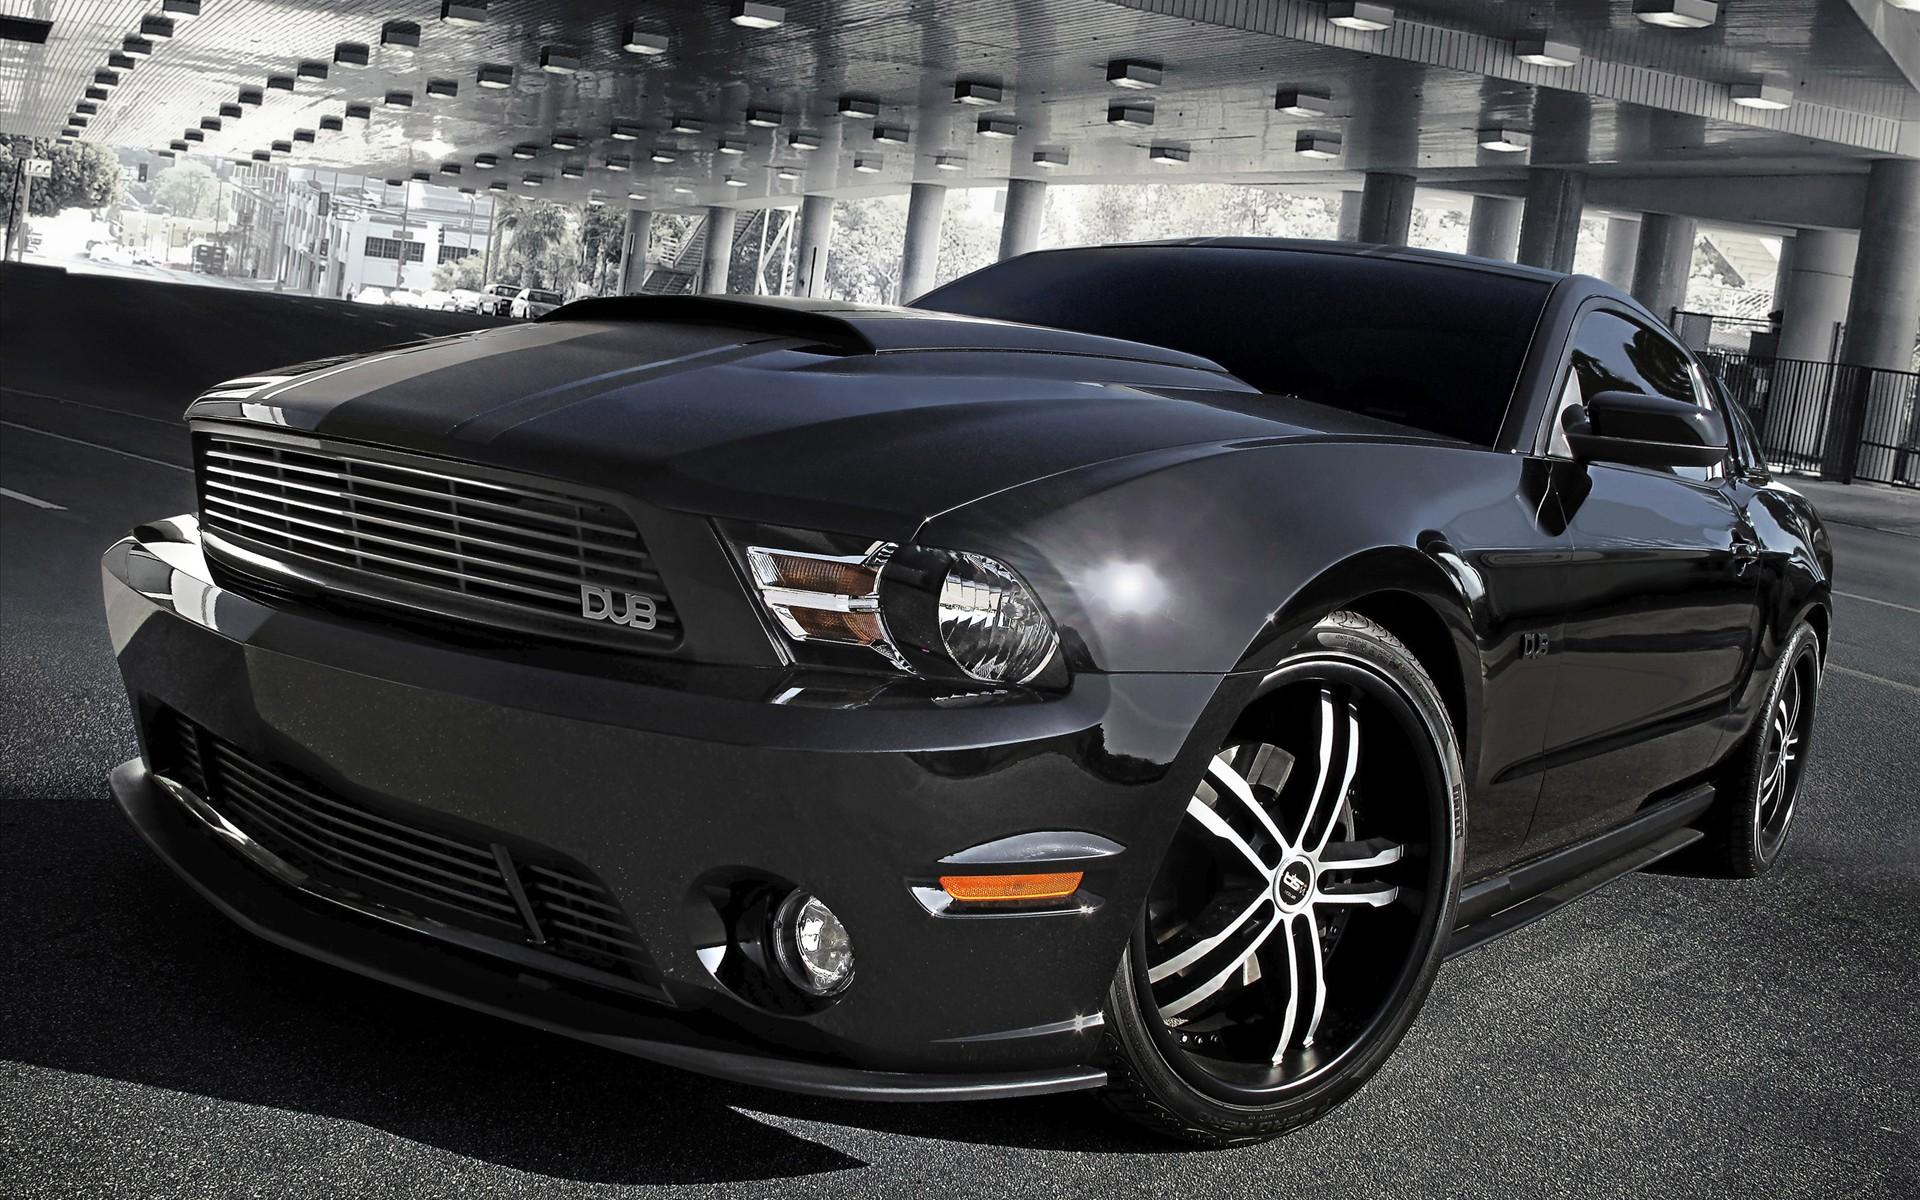 Ford Mustang Wallpapers Full Hd Wallpaper Search | HD Wallpapers Range